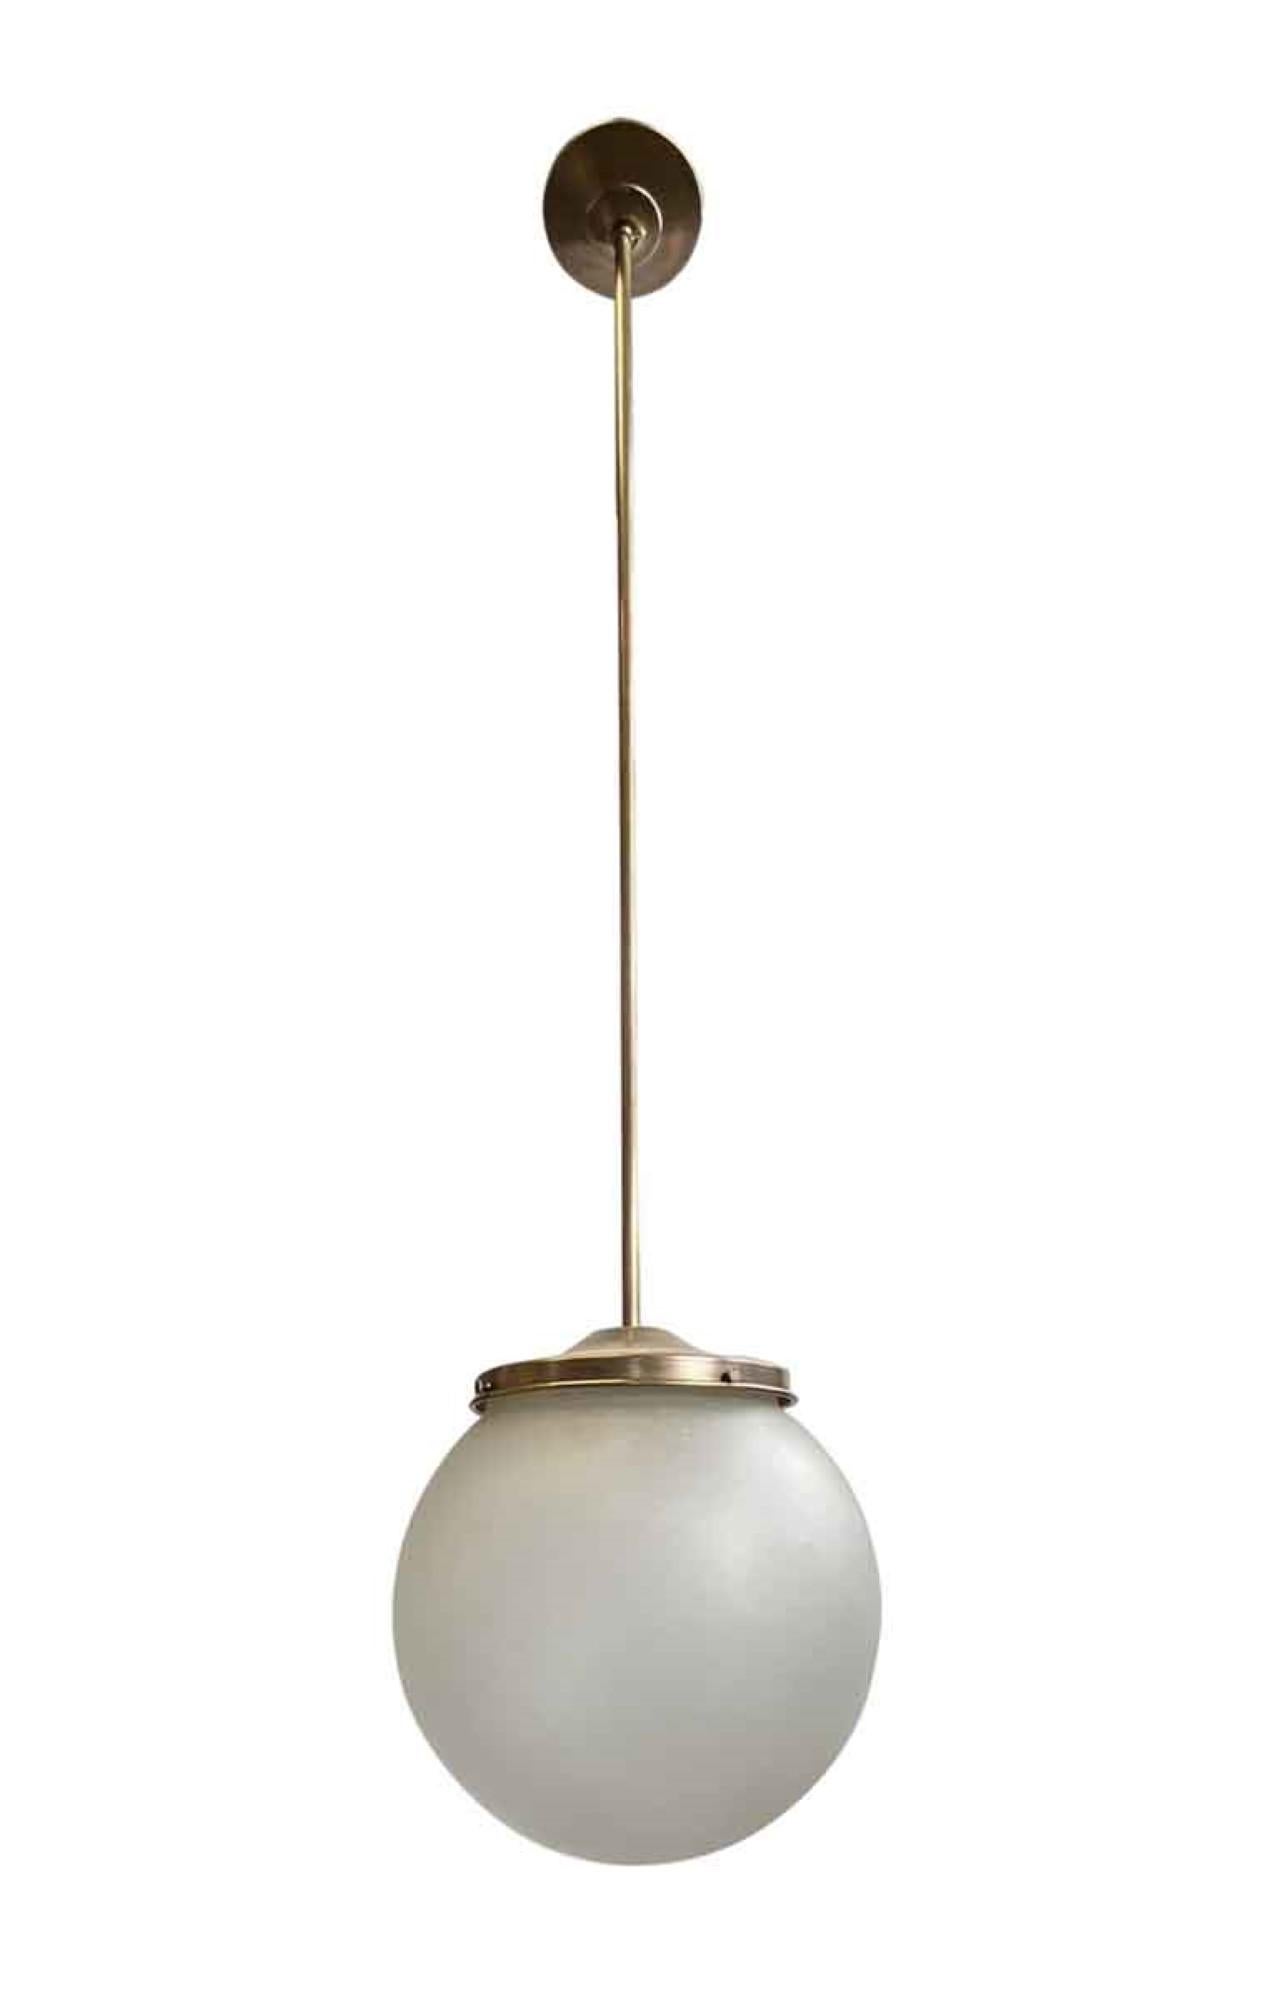 American 1940s Frosted Globe Pendant Light Antique Brass Finish Quantity Available